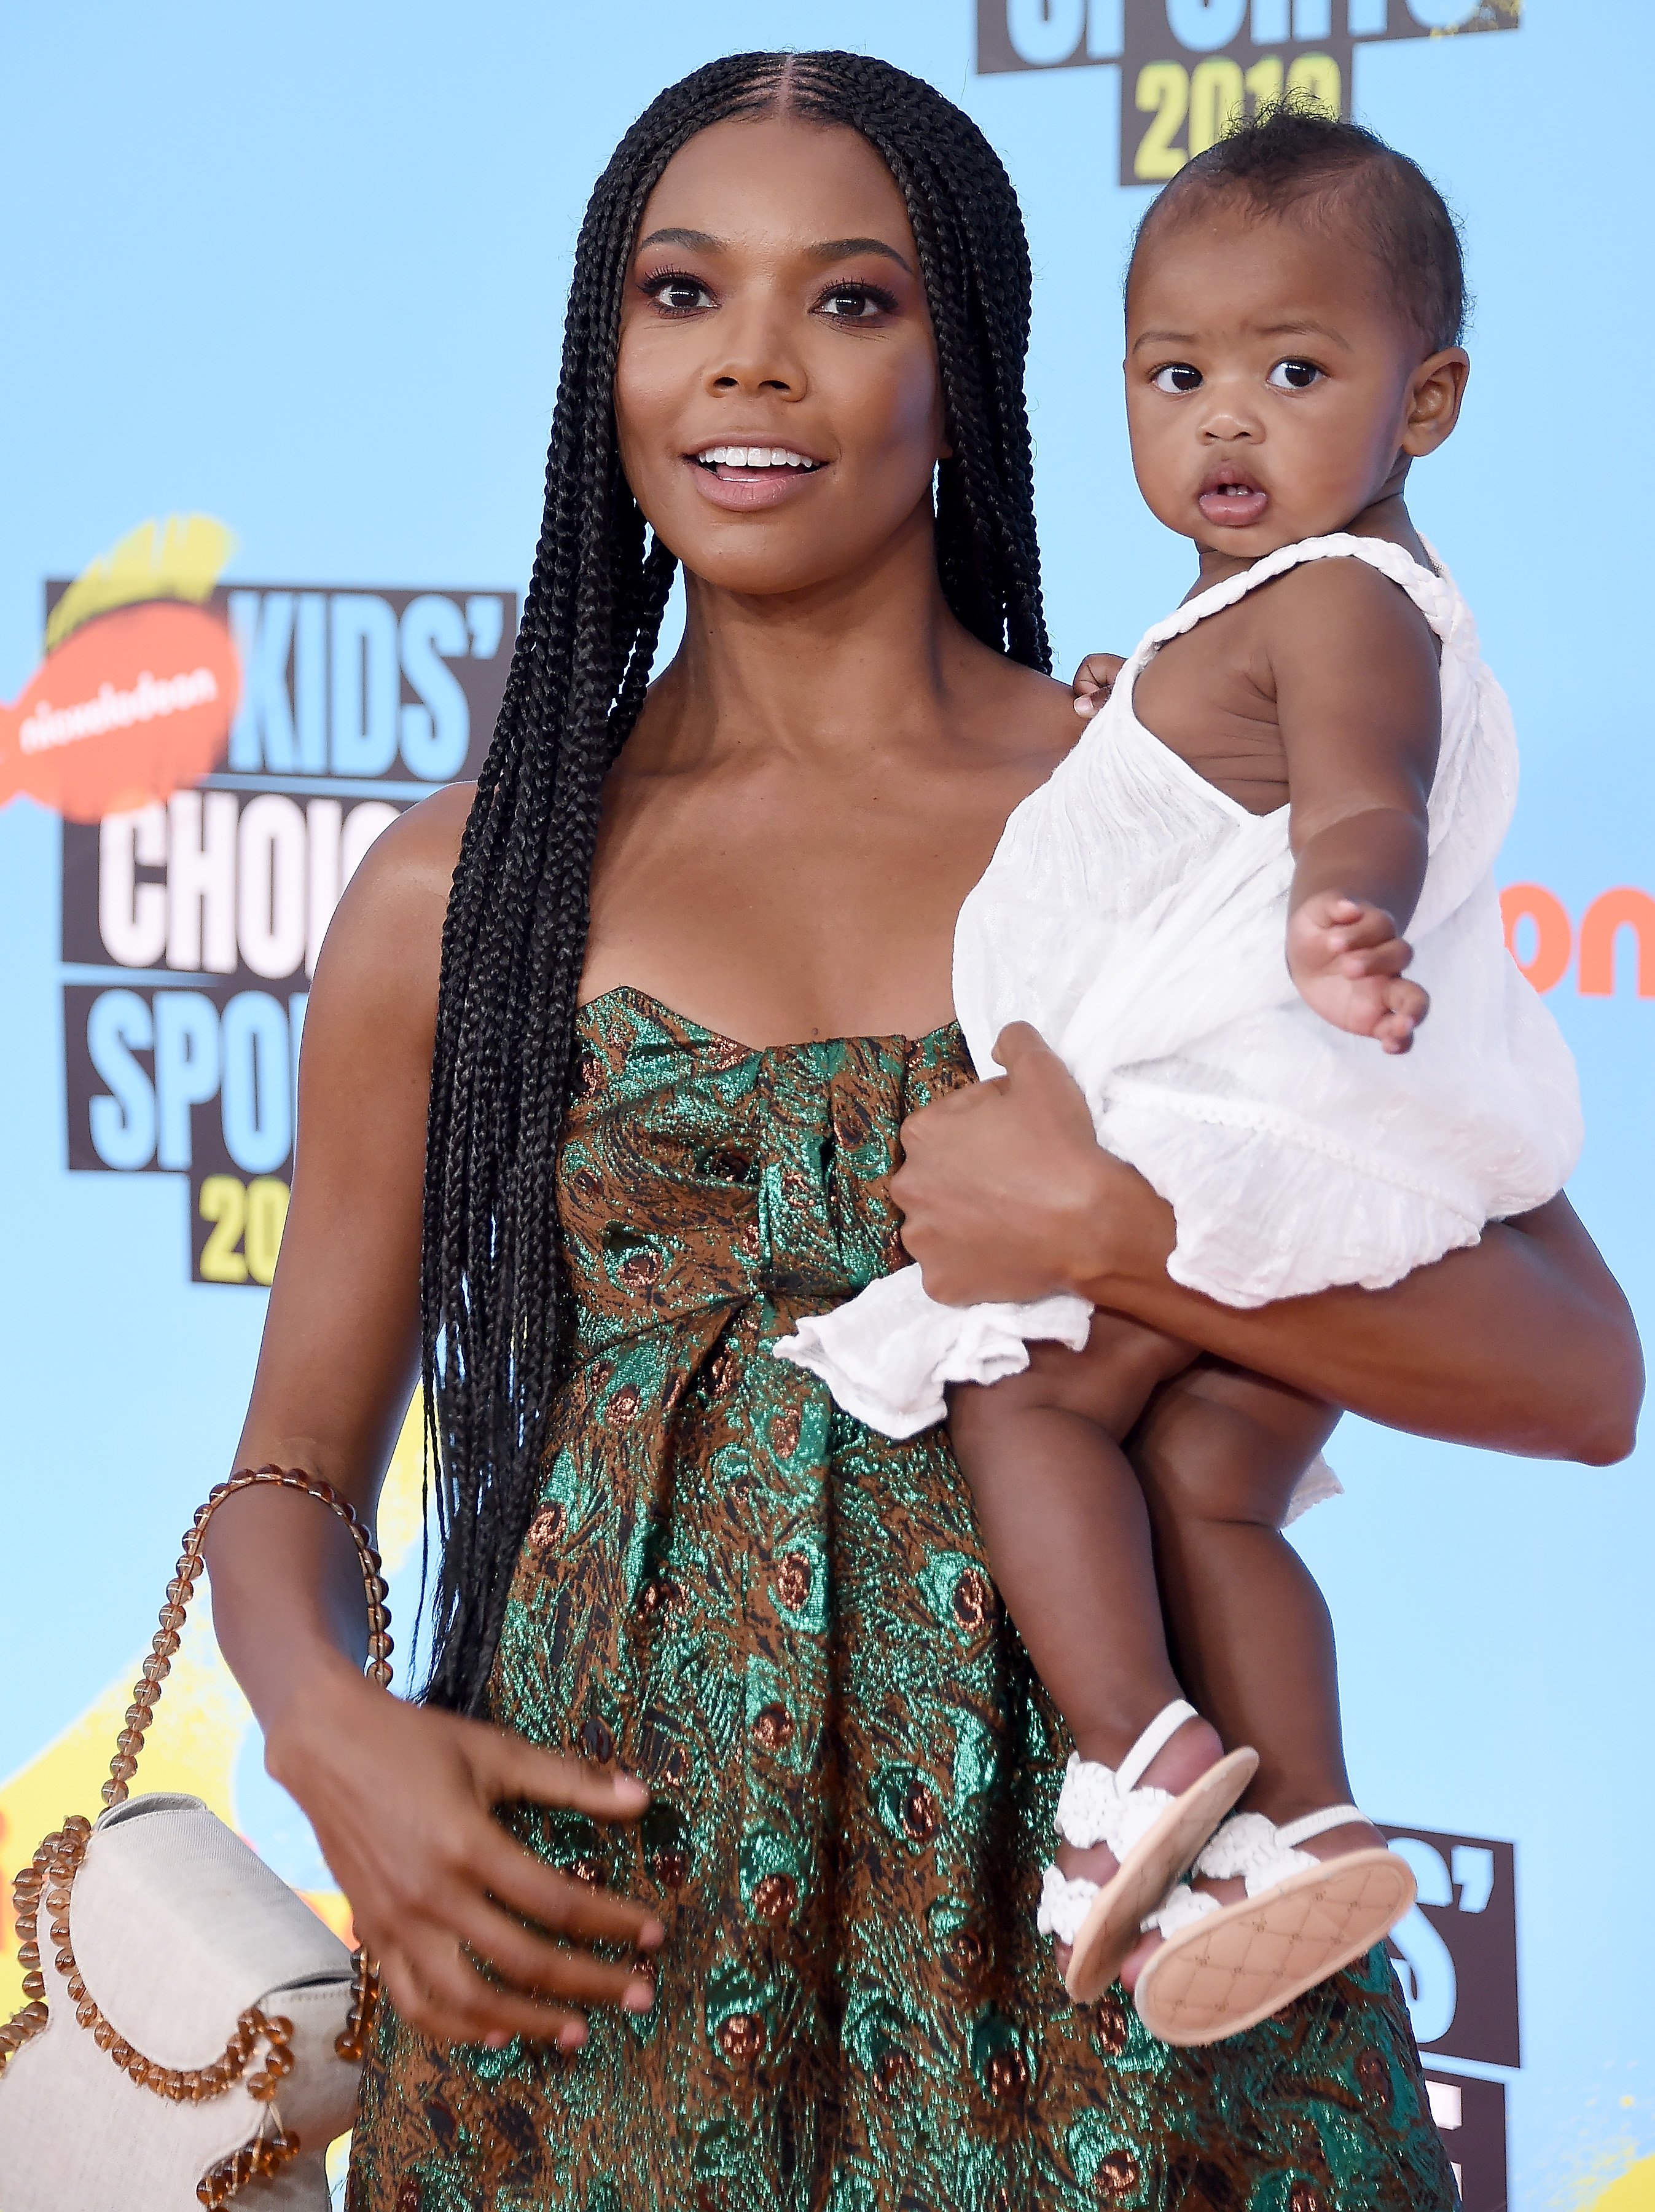 Gabrielle Union and Kaavia James Union Wade pictured at Nickelodeon Kids' Choice Sports 2019 on July 11, 2019 in Santa Monica, California. | Source: Getty Images